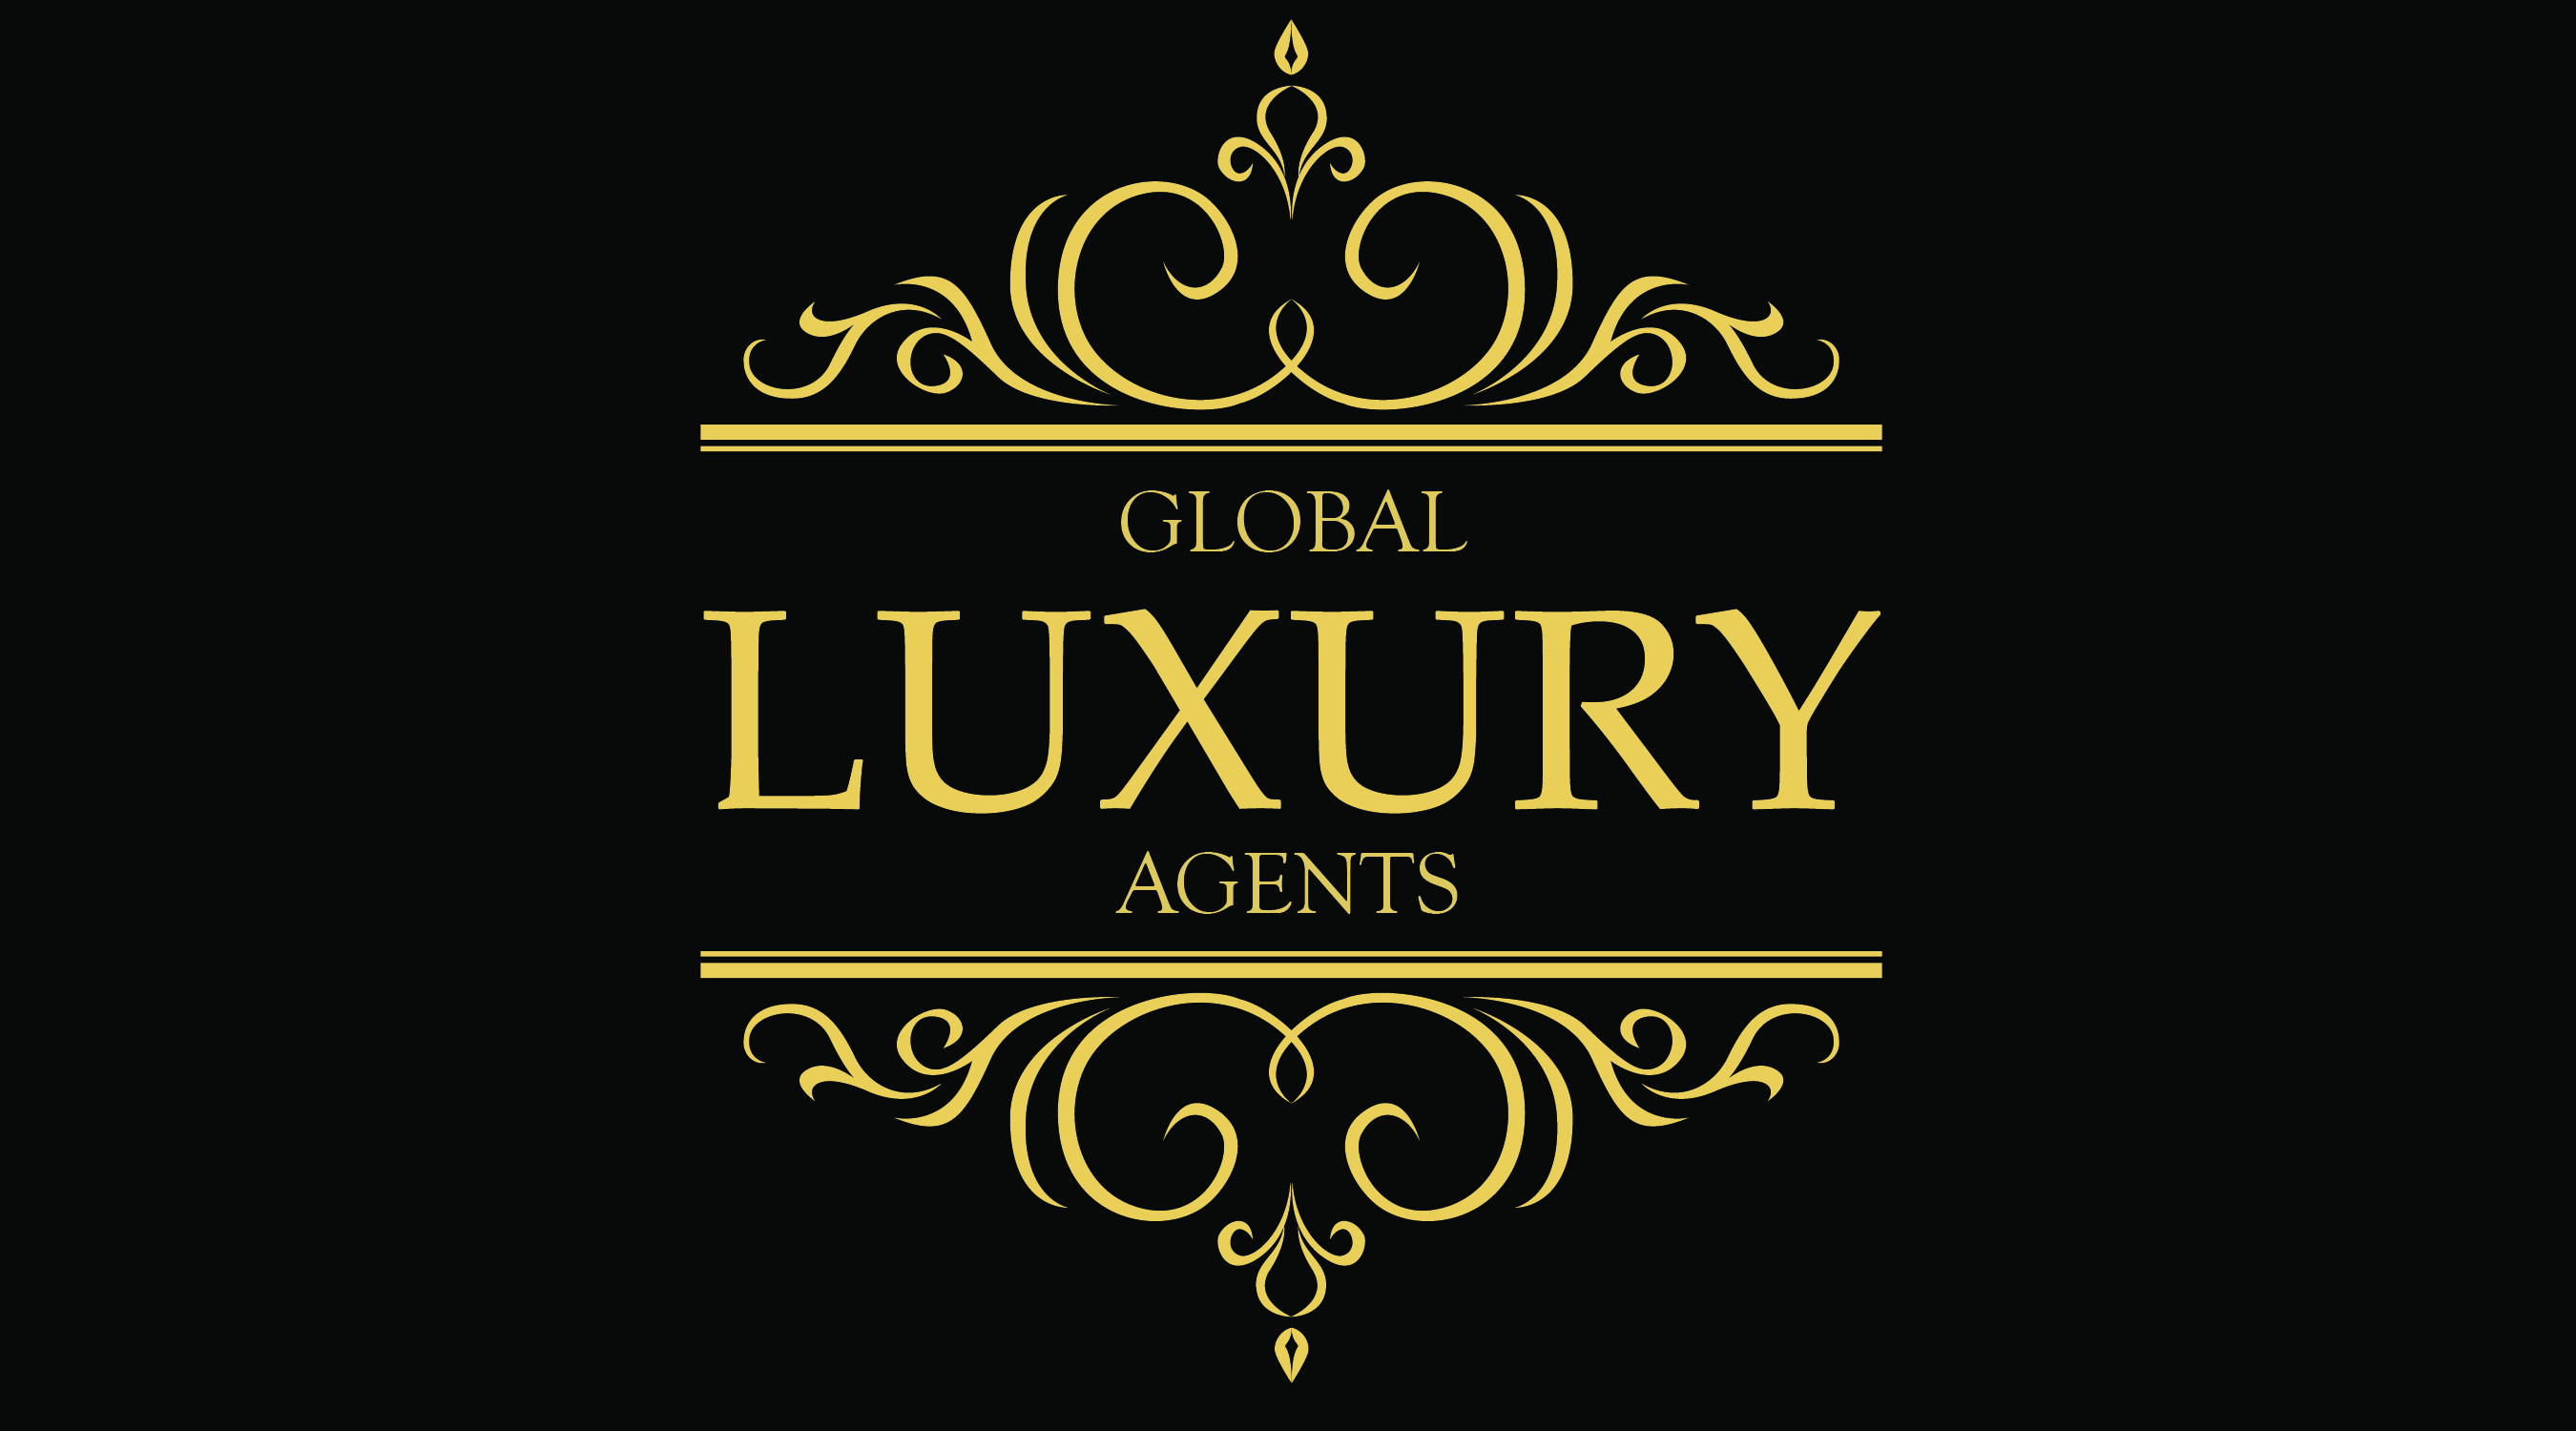 Featured Agent